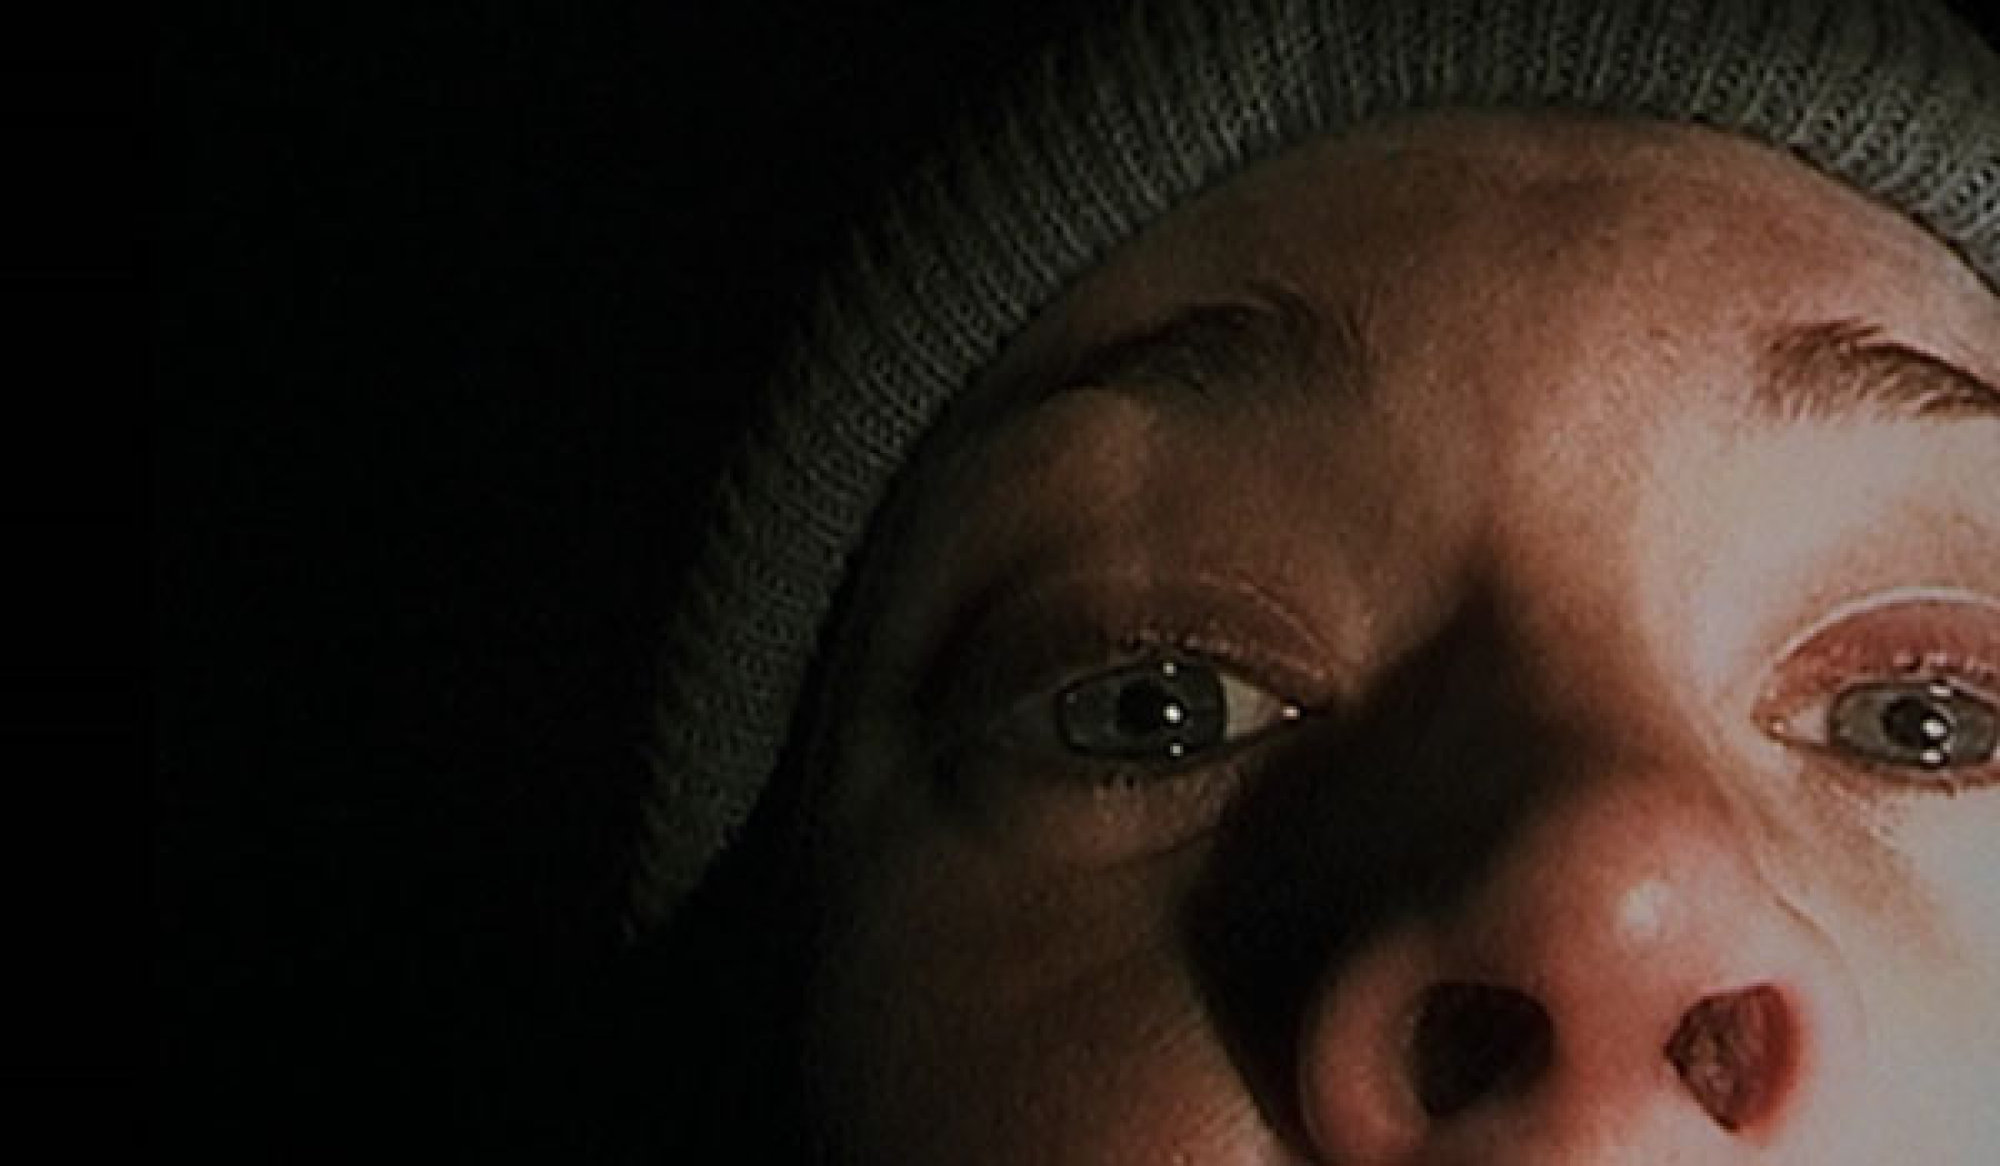 Heather Donahue in The Blair Witch Project